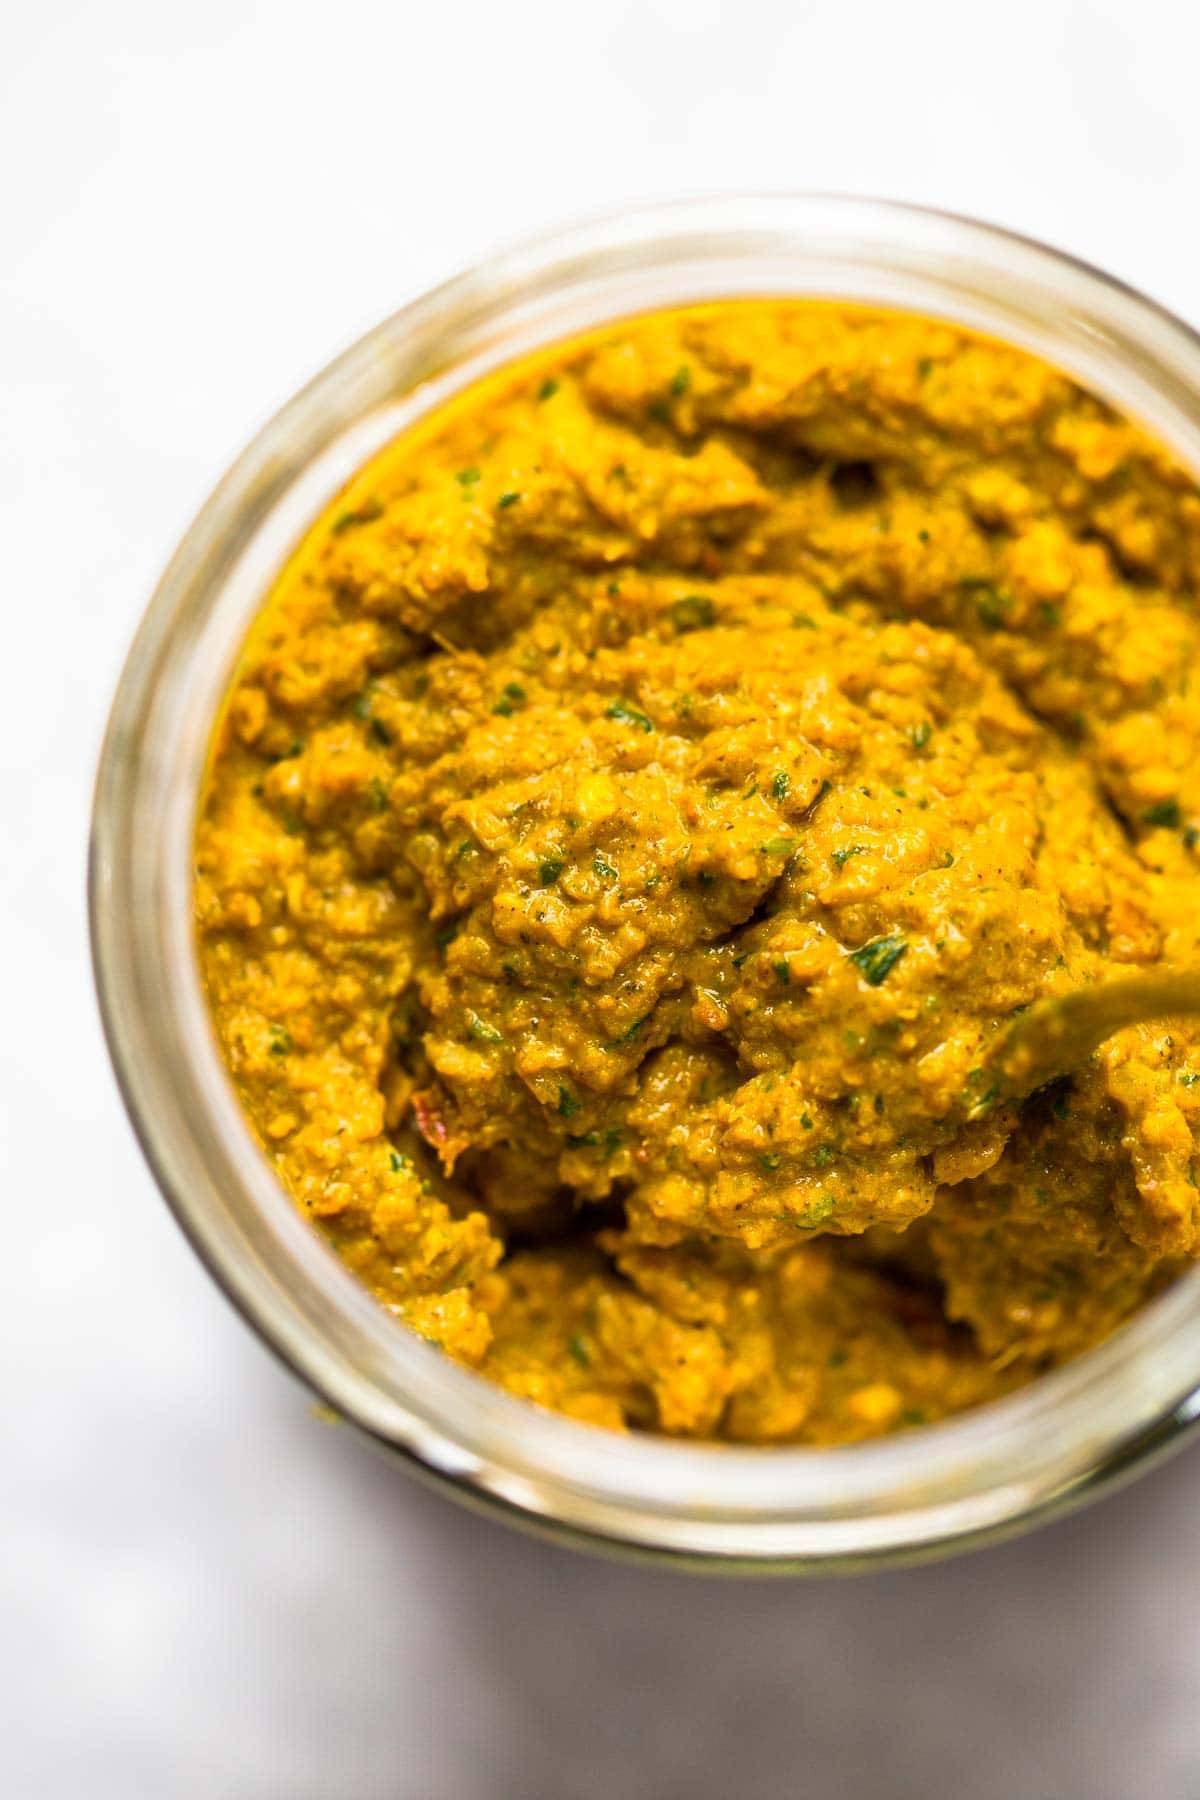 Homemade yellow curry paste in a jar with a spoon. 